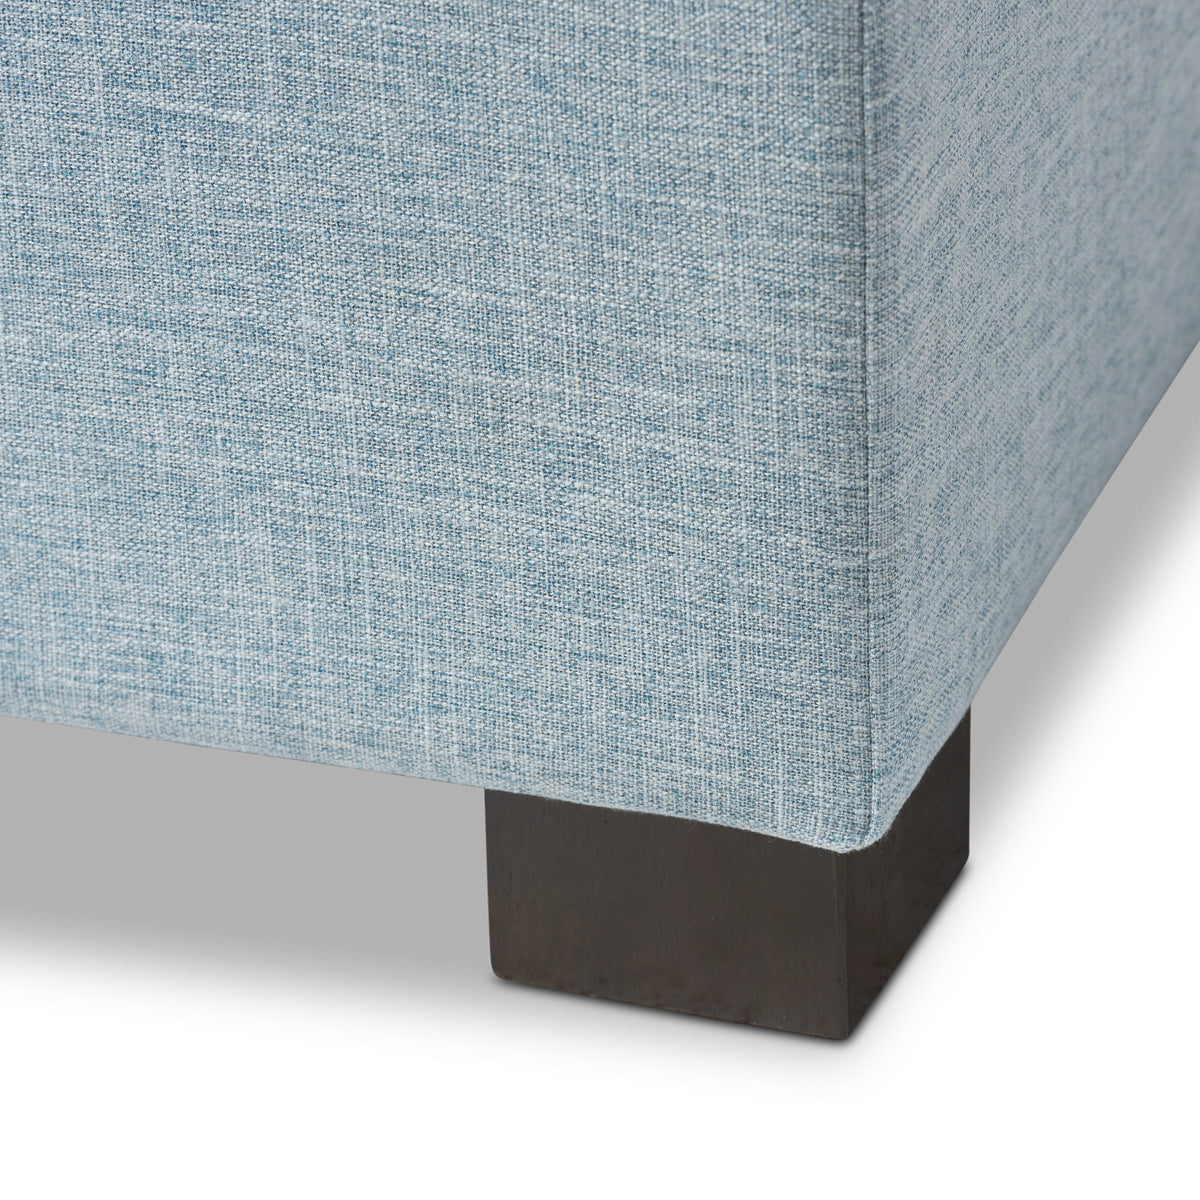 Baxton Studio Roanoke Modern and Contemporary Light Blue Fabric Upholstered Grid-Tufting Storage Ottoman Bench Baxton Studio-benches-Minimal And Modern - 8